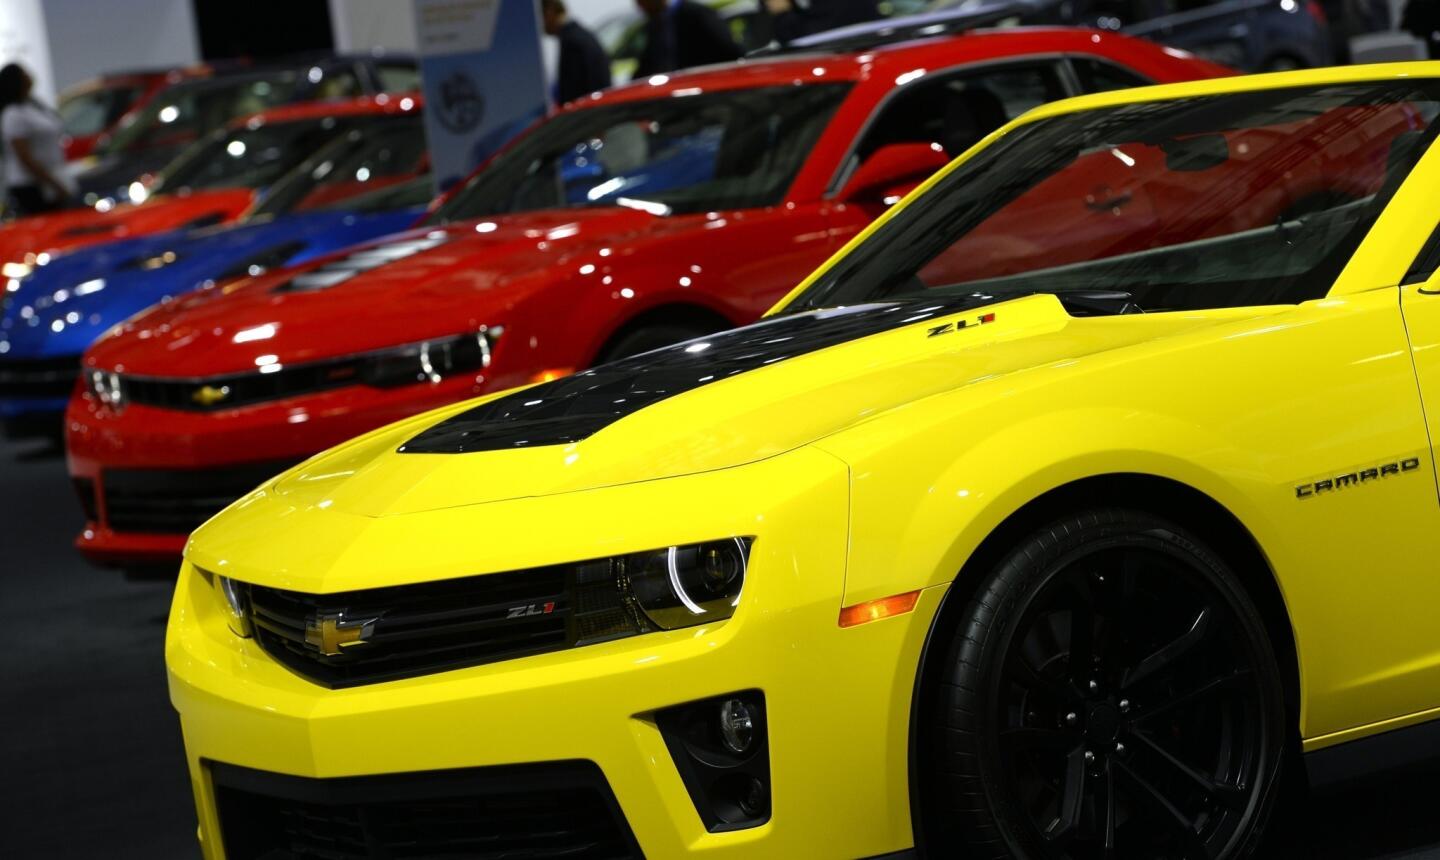 Chevrolet Camaros are displayed at the 2014 New York International Auto Show.